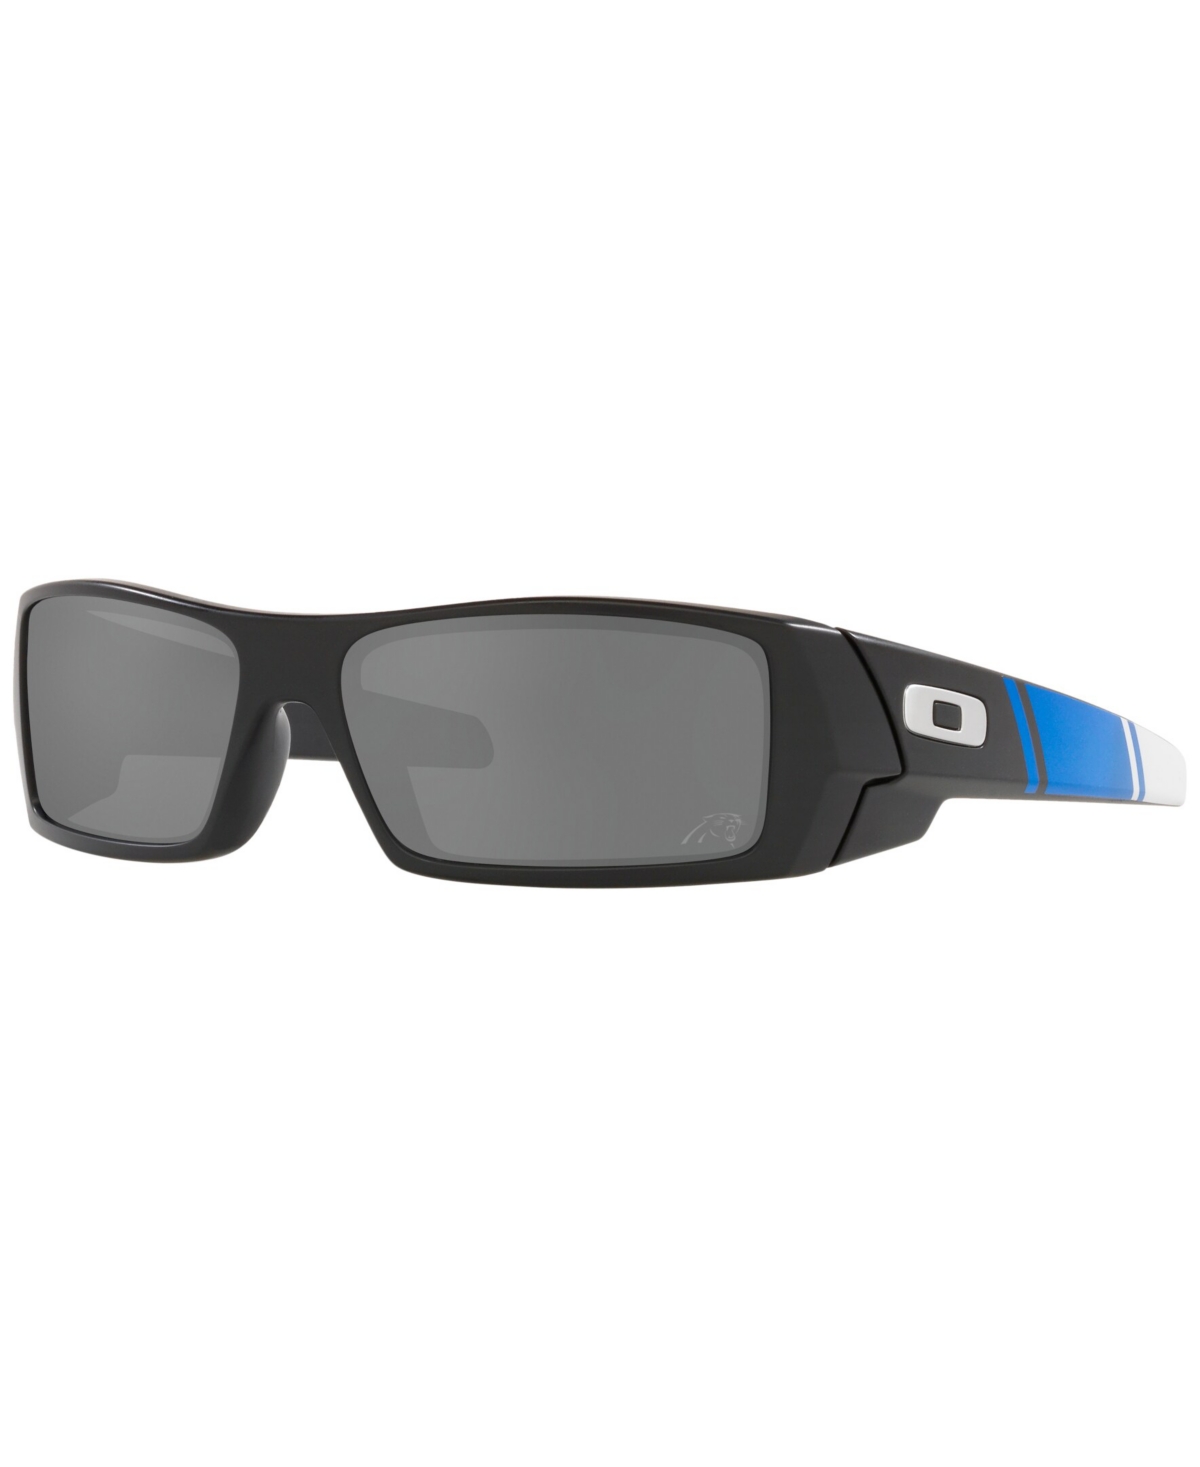 OAKLEY NFL COLLECTION MEN'S SUNGLASSES, CAROLINA PANTHERS OO9014 60 GASCAN